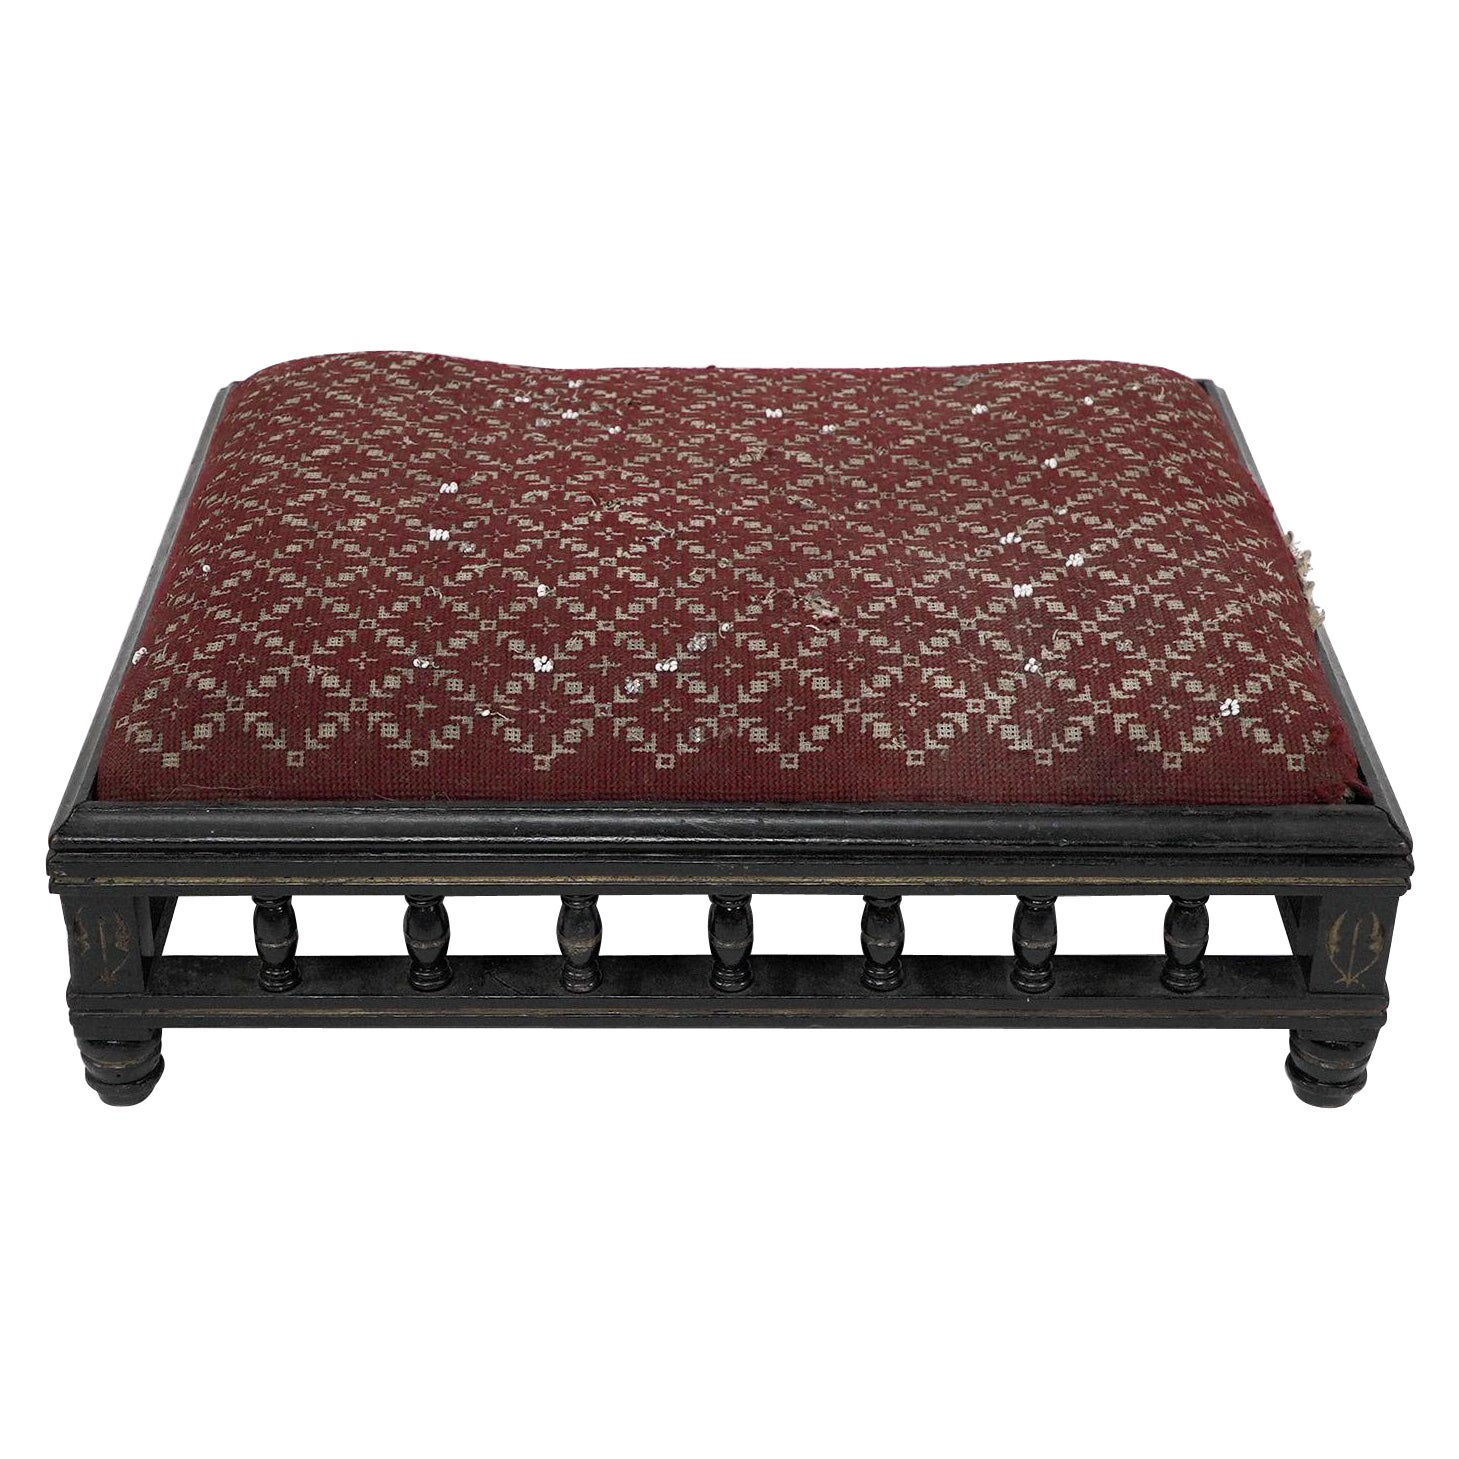 A small Aesthetic Movement ebonized foot stool For Sale